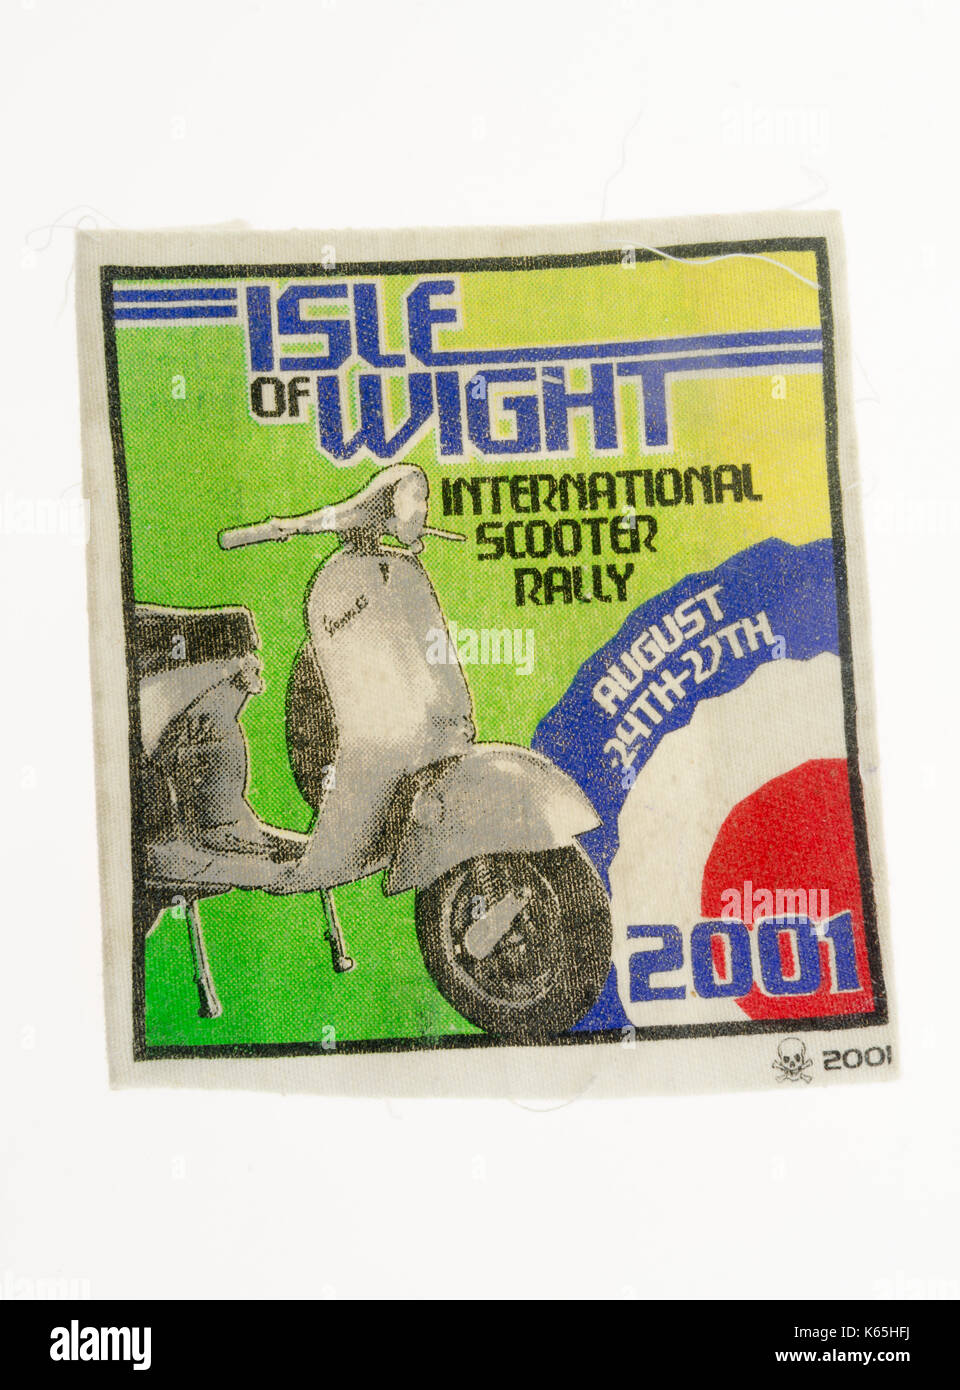 Isle of Wight Scooter Rally Patch Stock Photo - Alamy